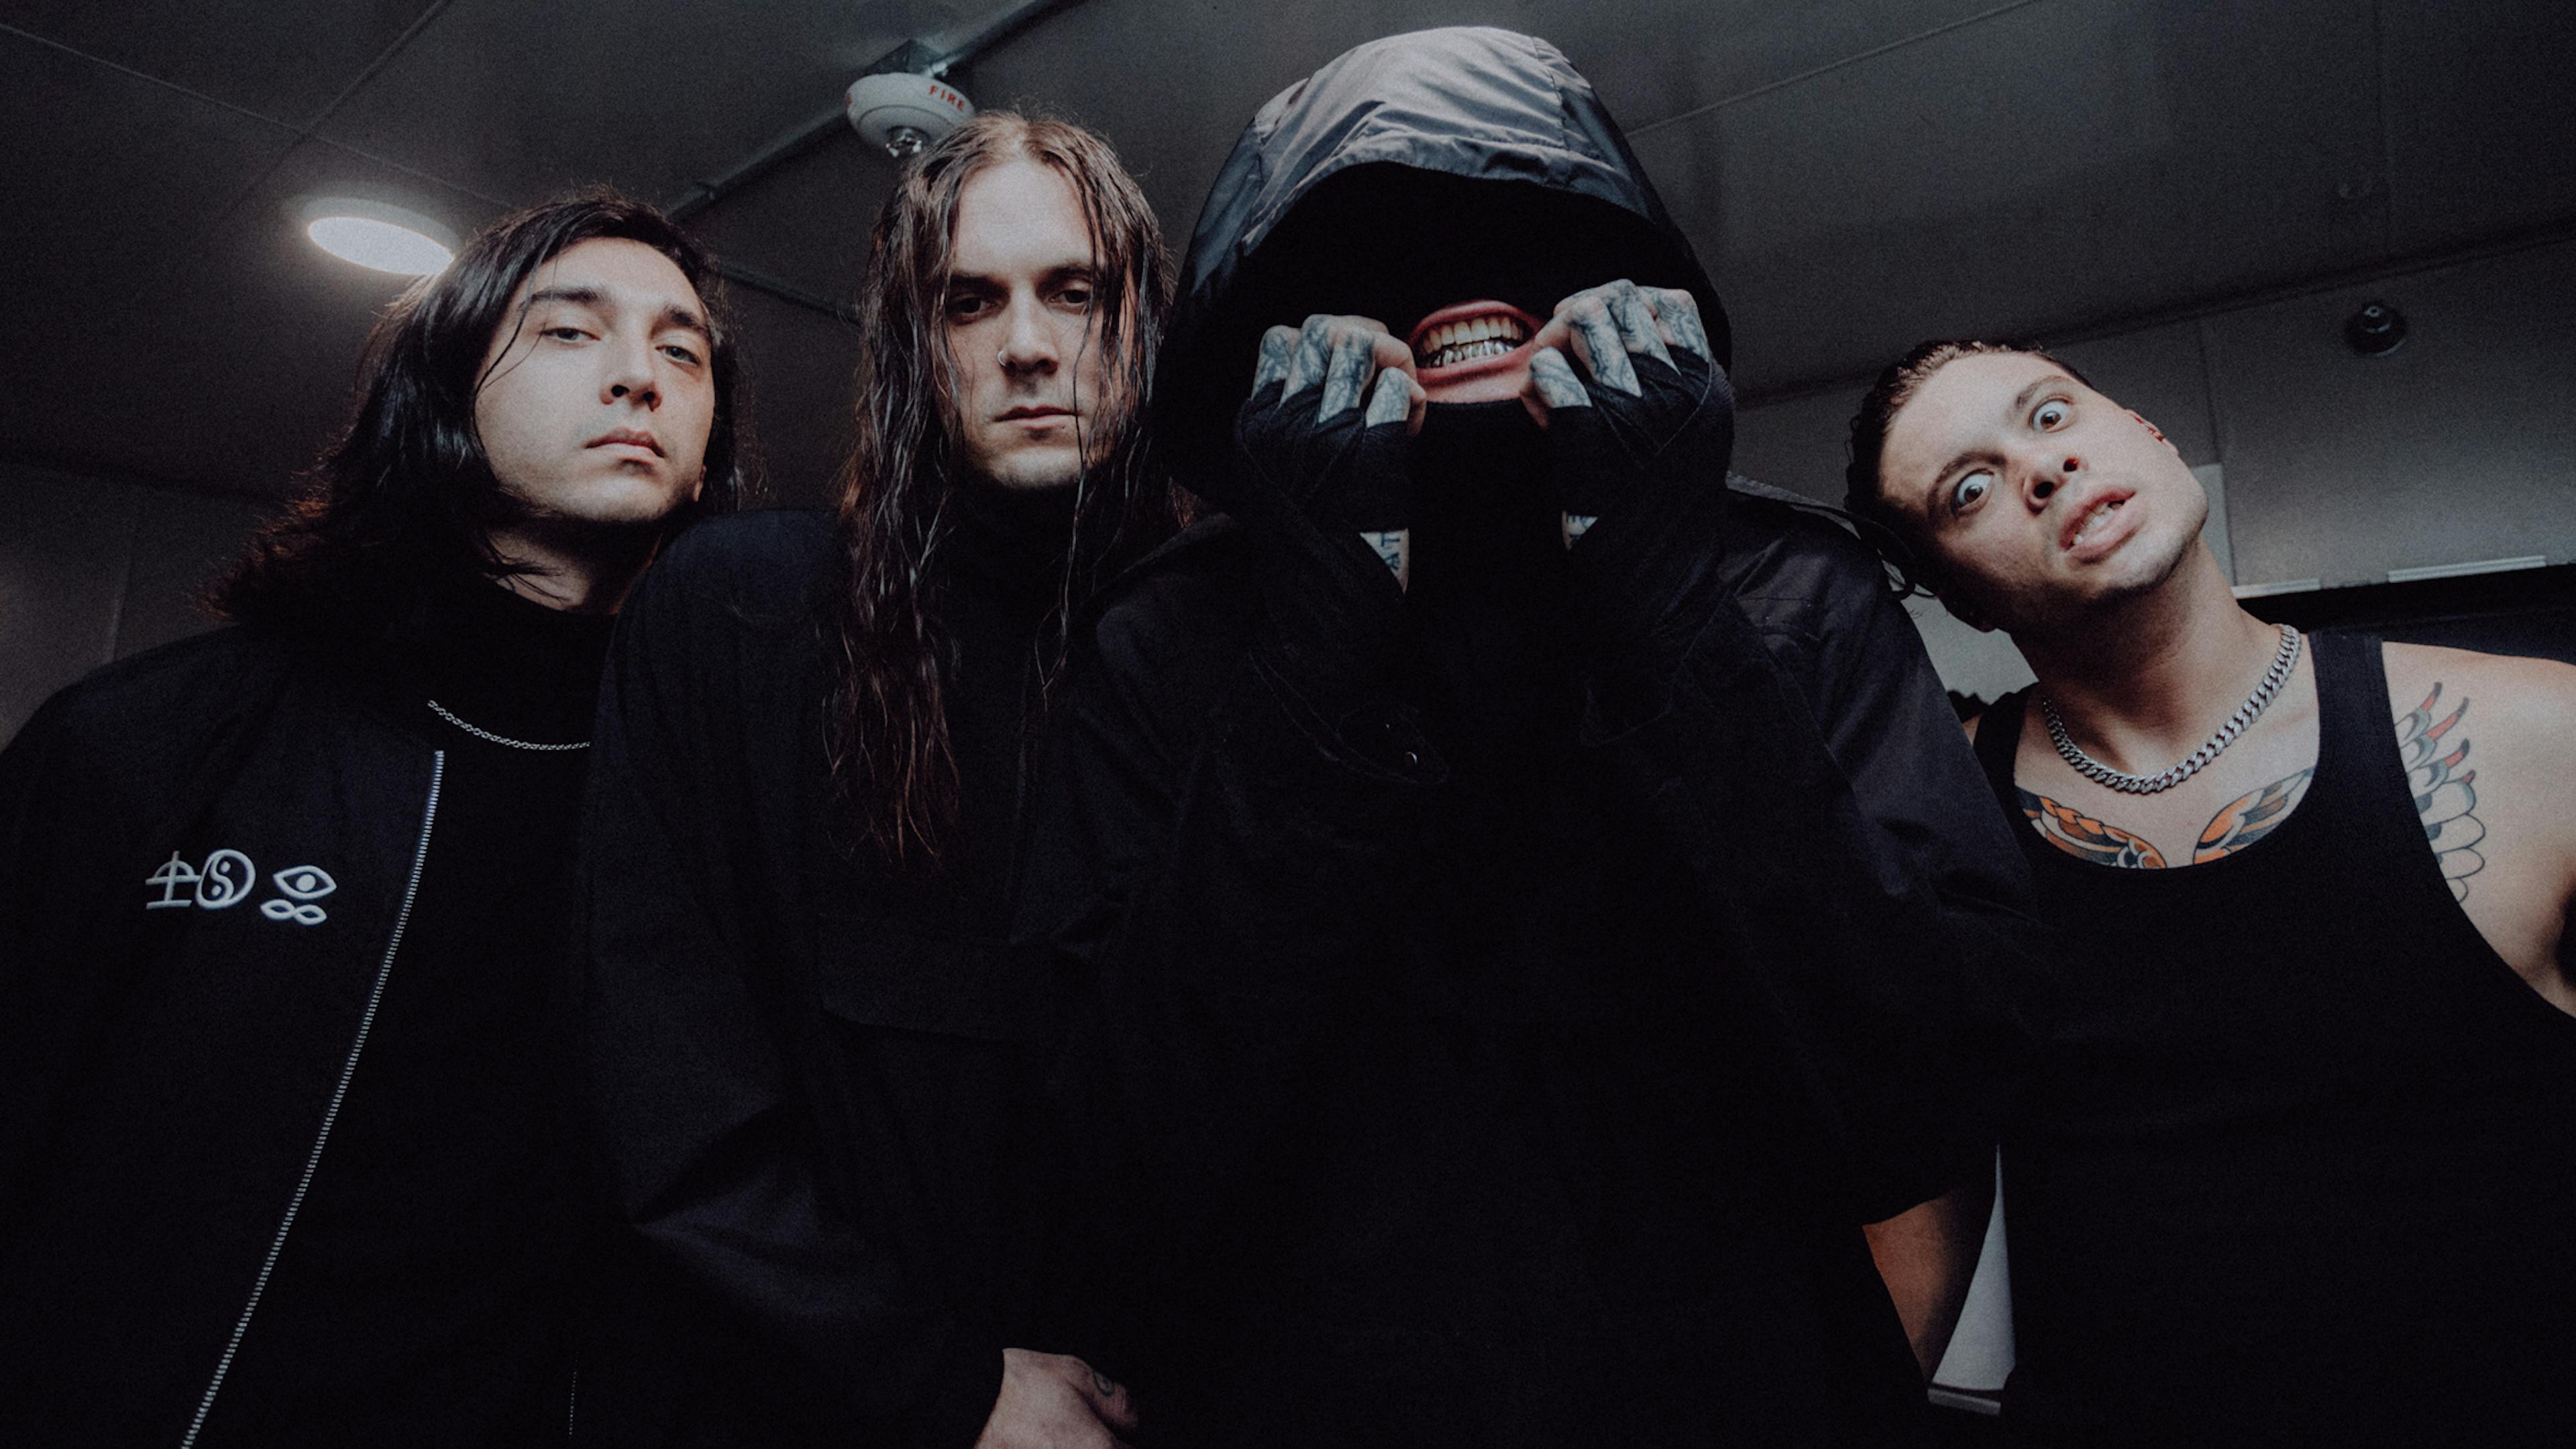 Bad Omens announce support for spring U.S. headline shows